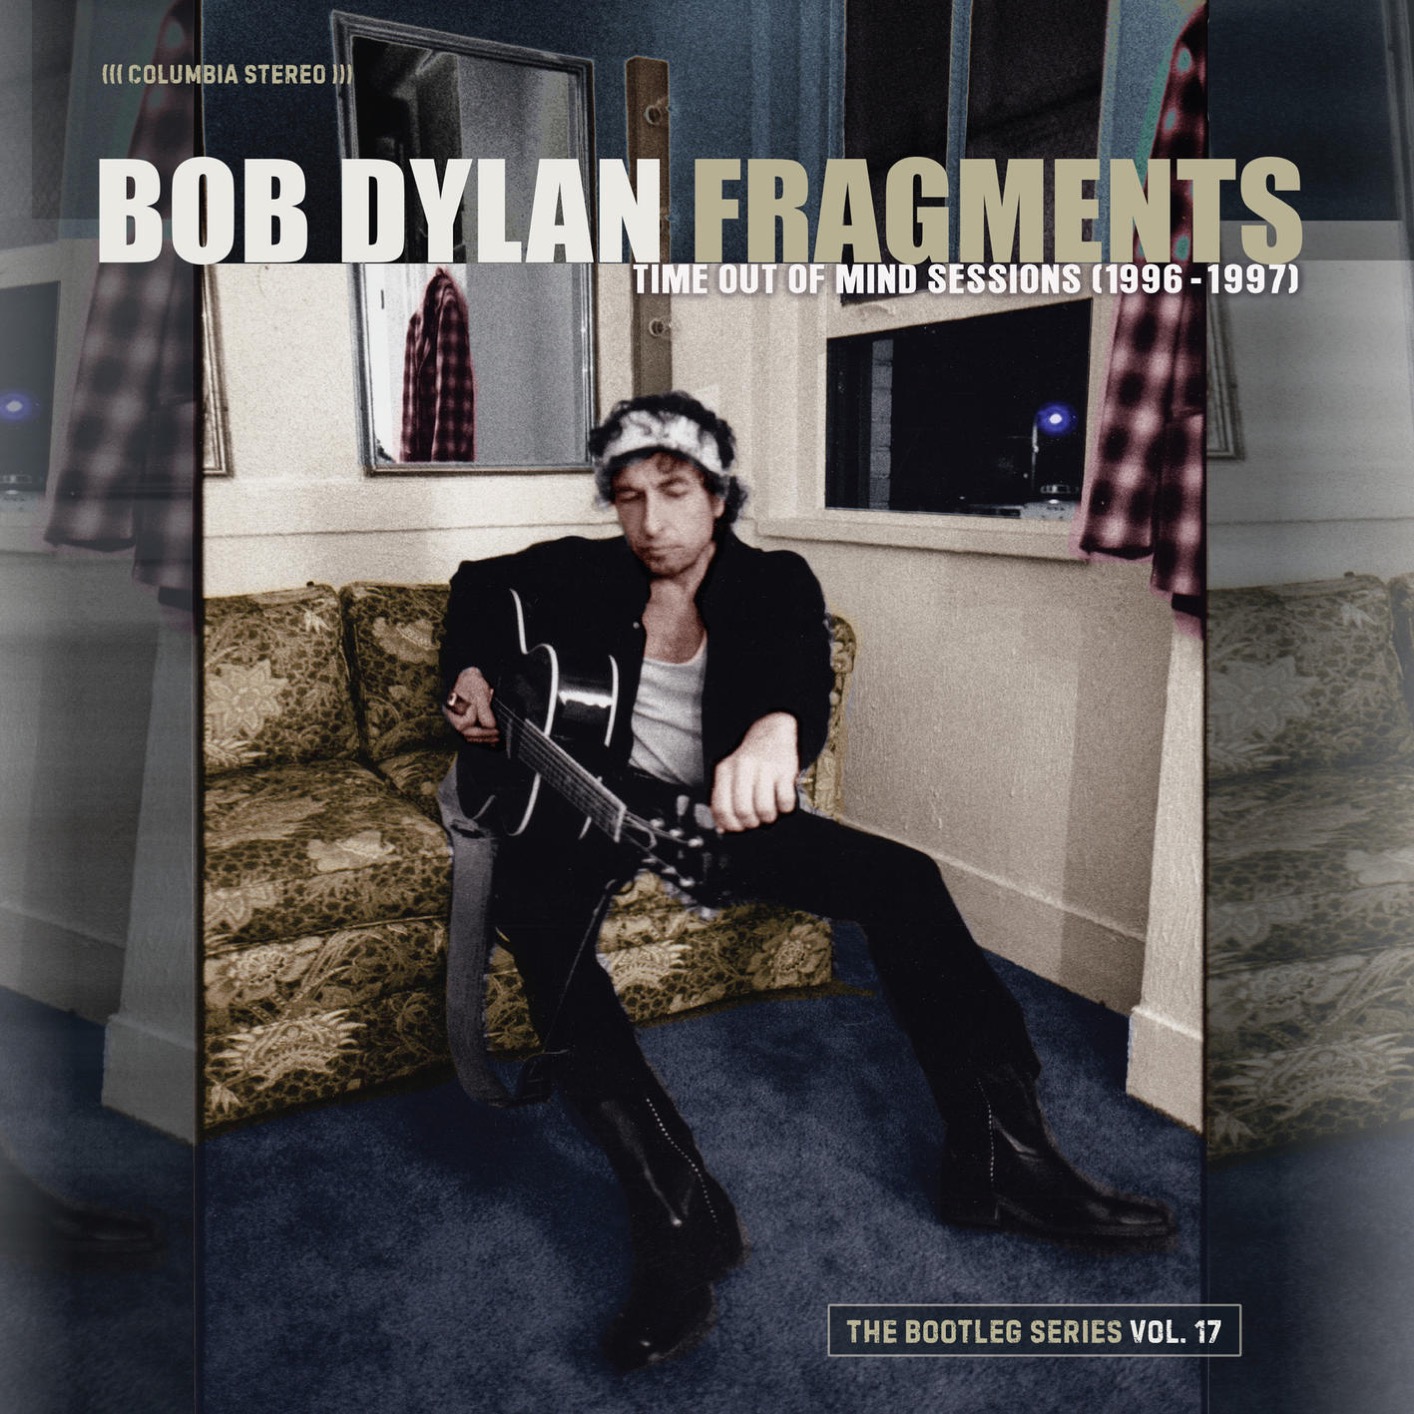 Bob Dylan – Fragments – Time Out of Mind Sessions (1996-1997)： The Bootleg Series, Vol. 17 (Remastered)【FLAC 96】-OppsUpro音乐帝国